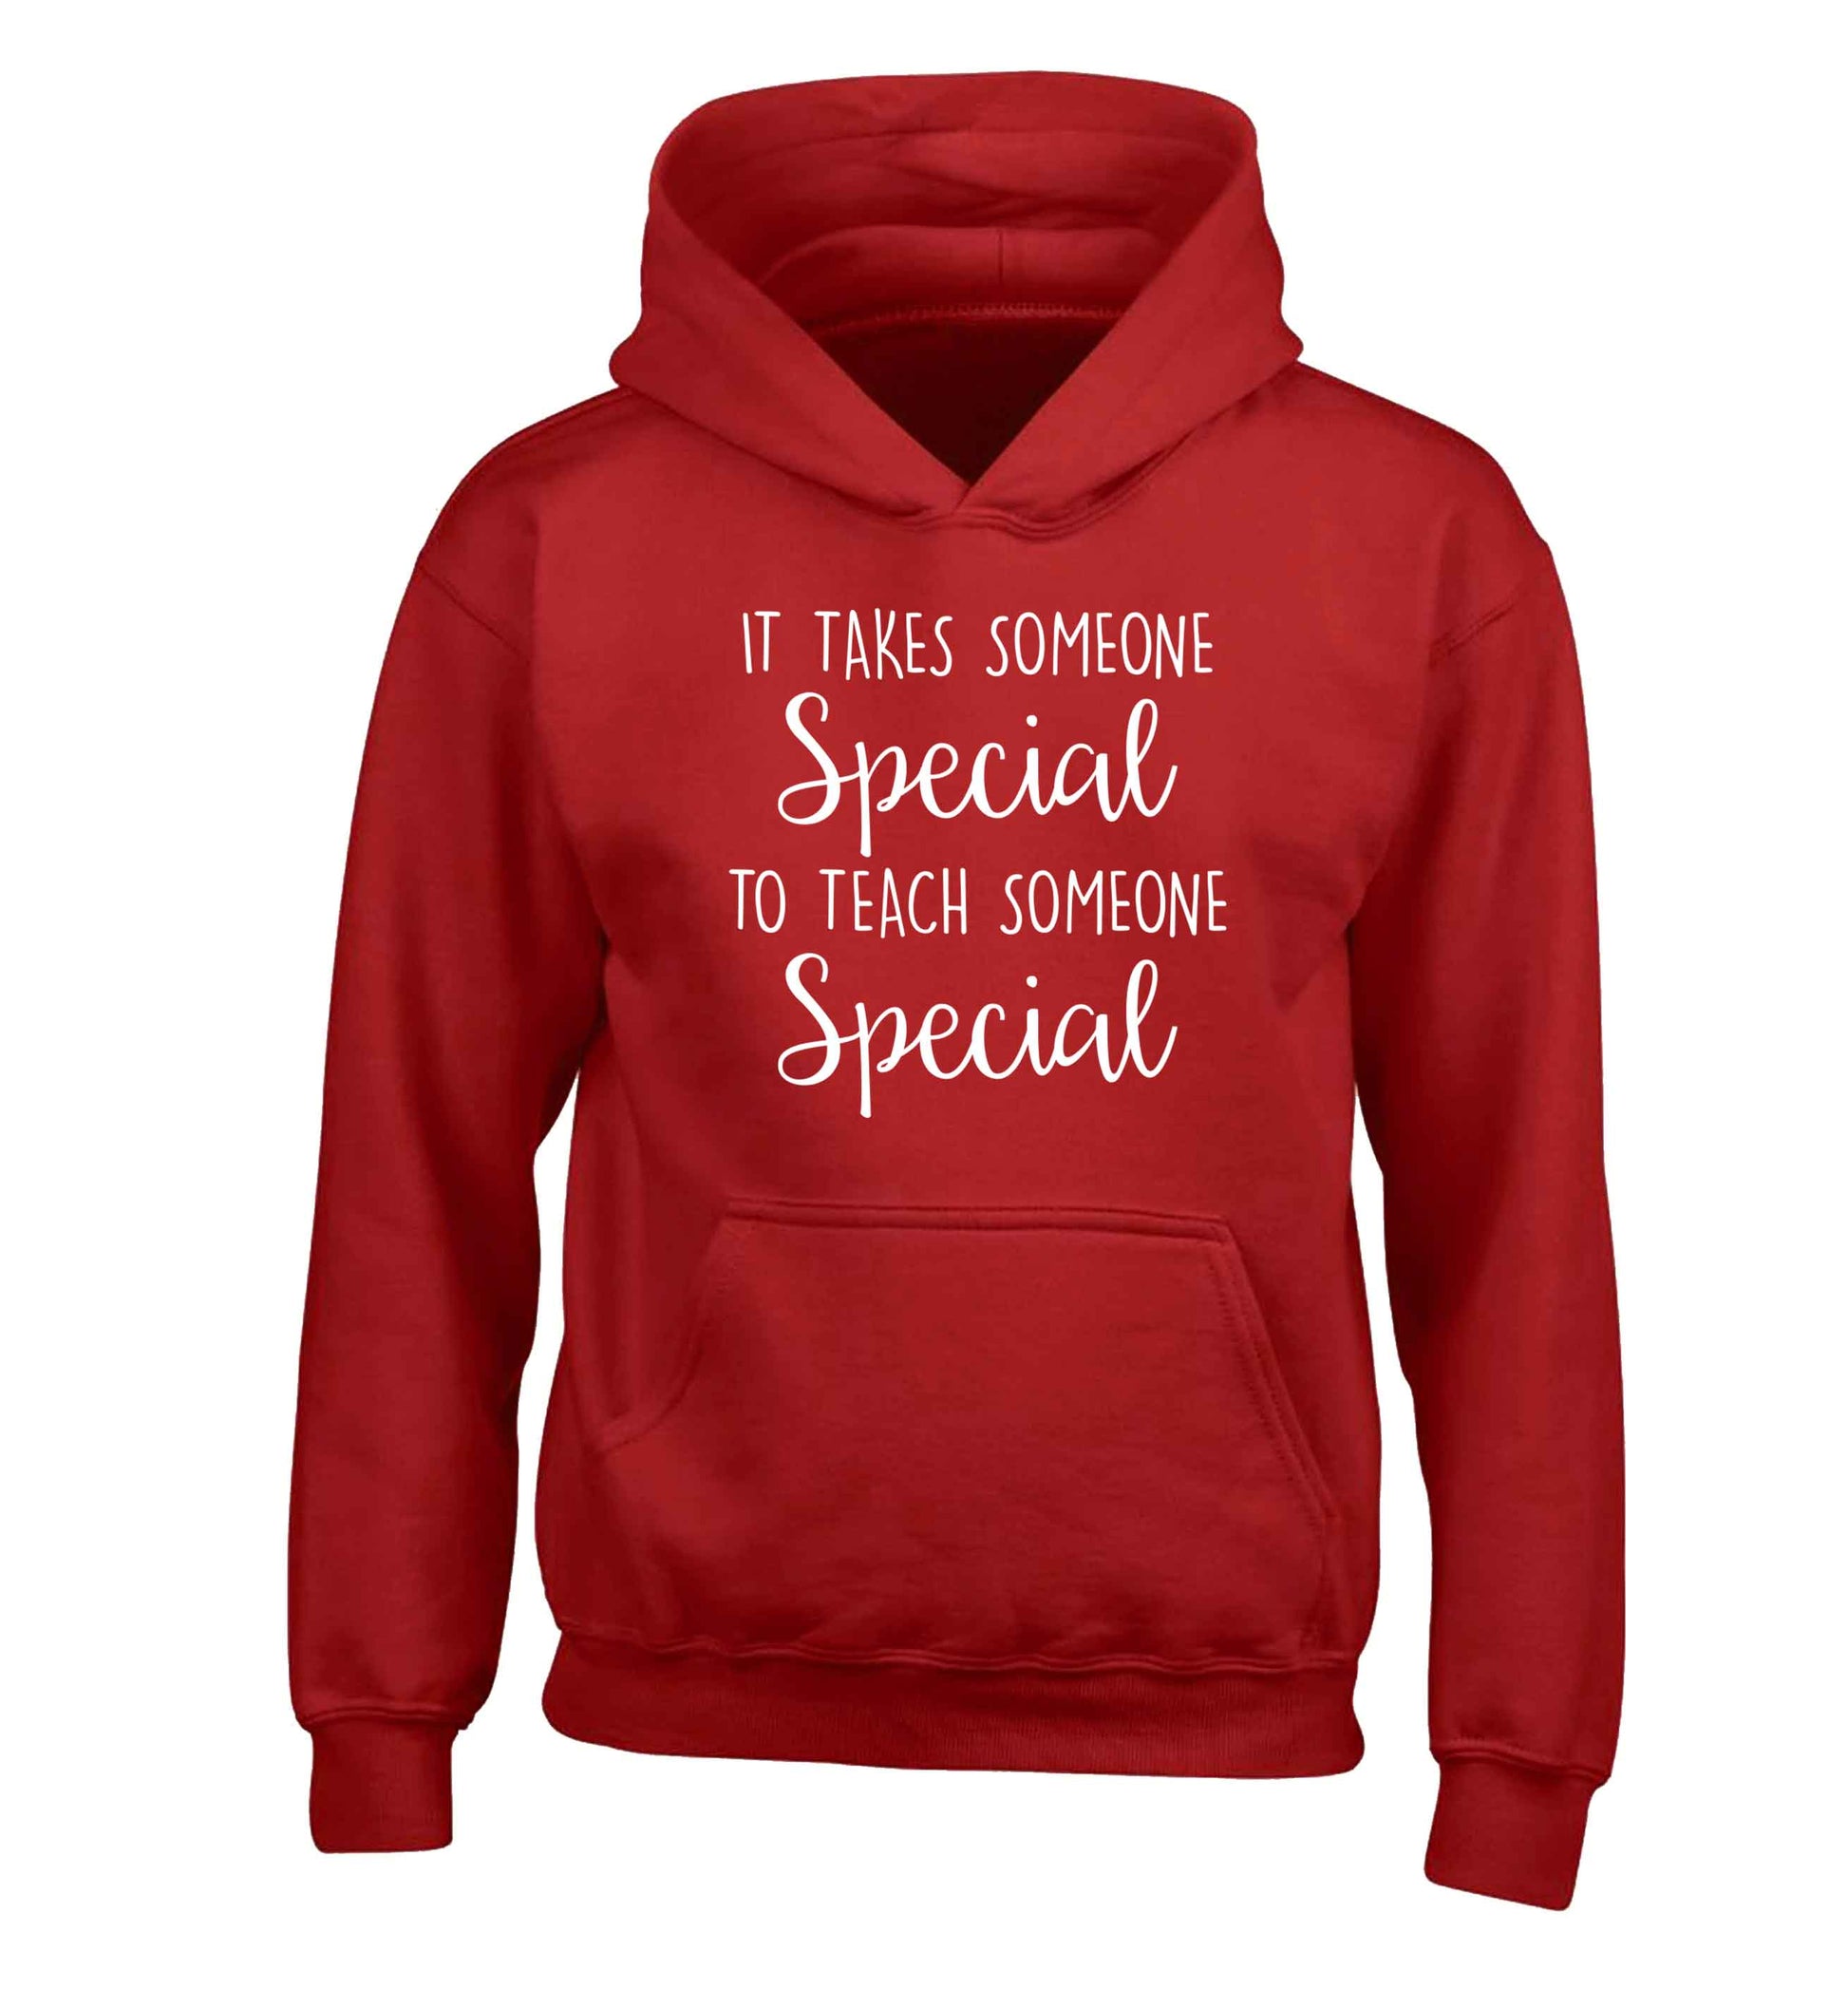 It takes someone special to teach someone special children's red hoodie 12-13 Years